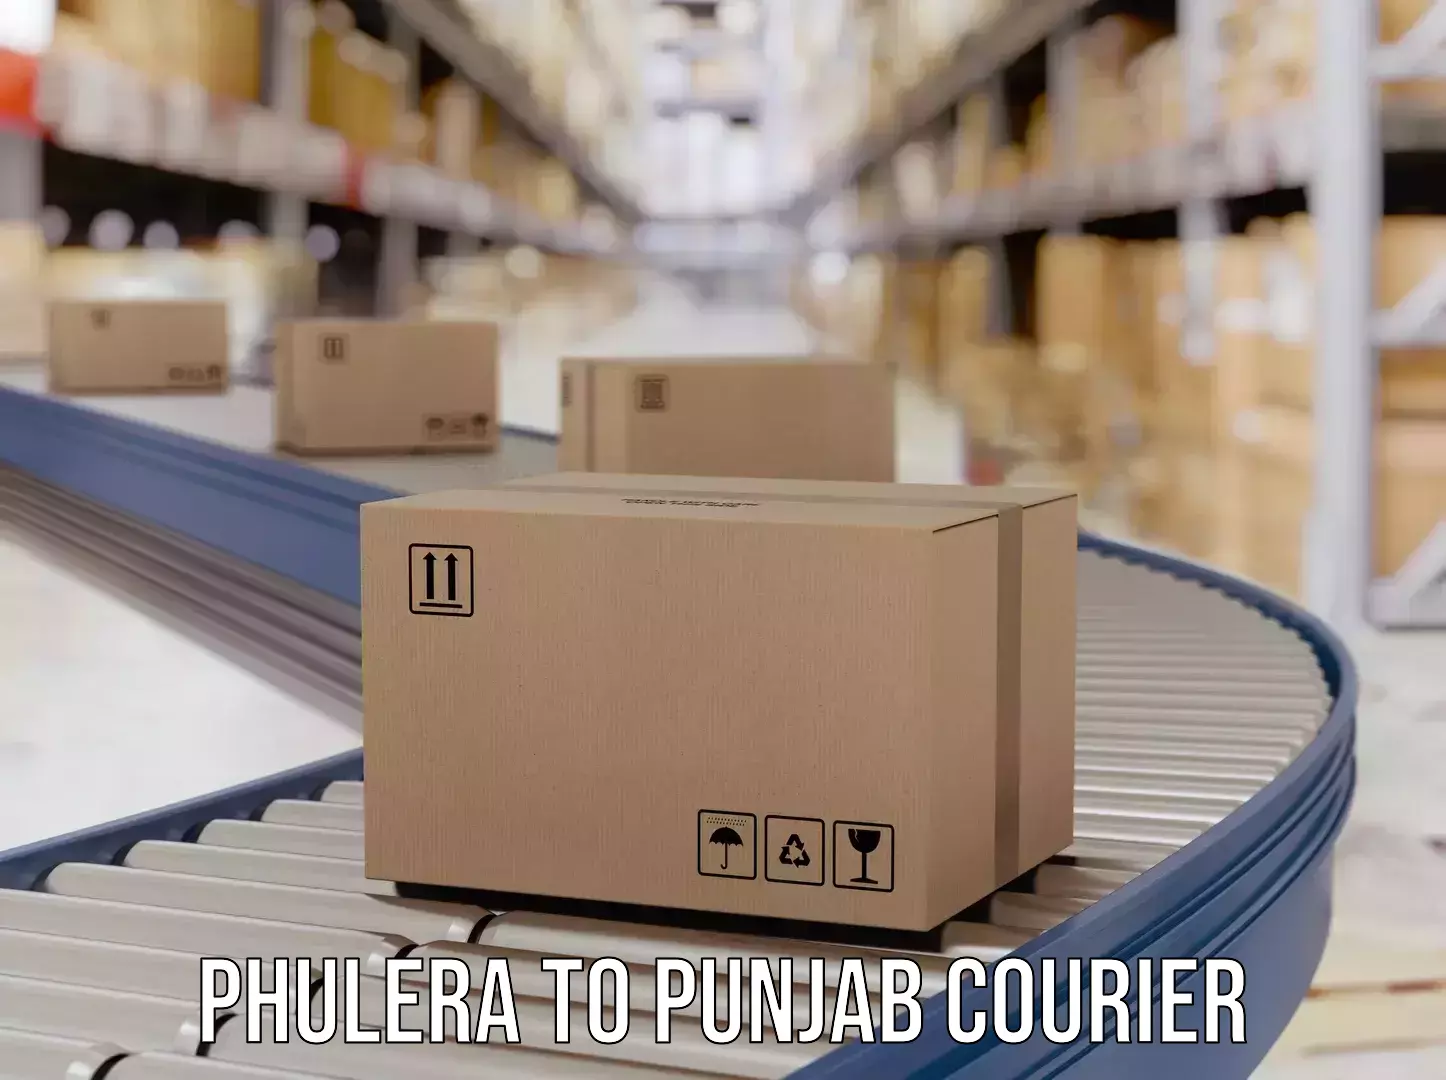 State-of-the-art courier technology Phulera to Faridkot